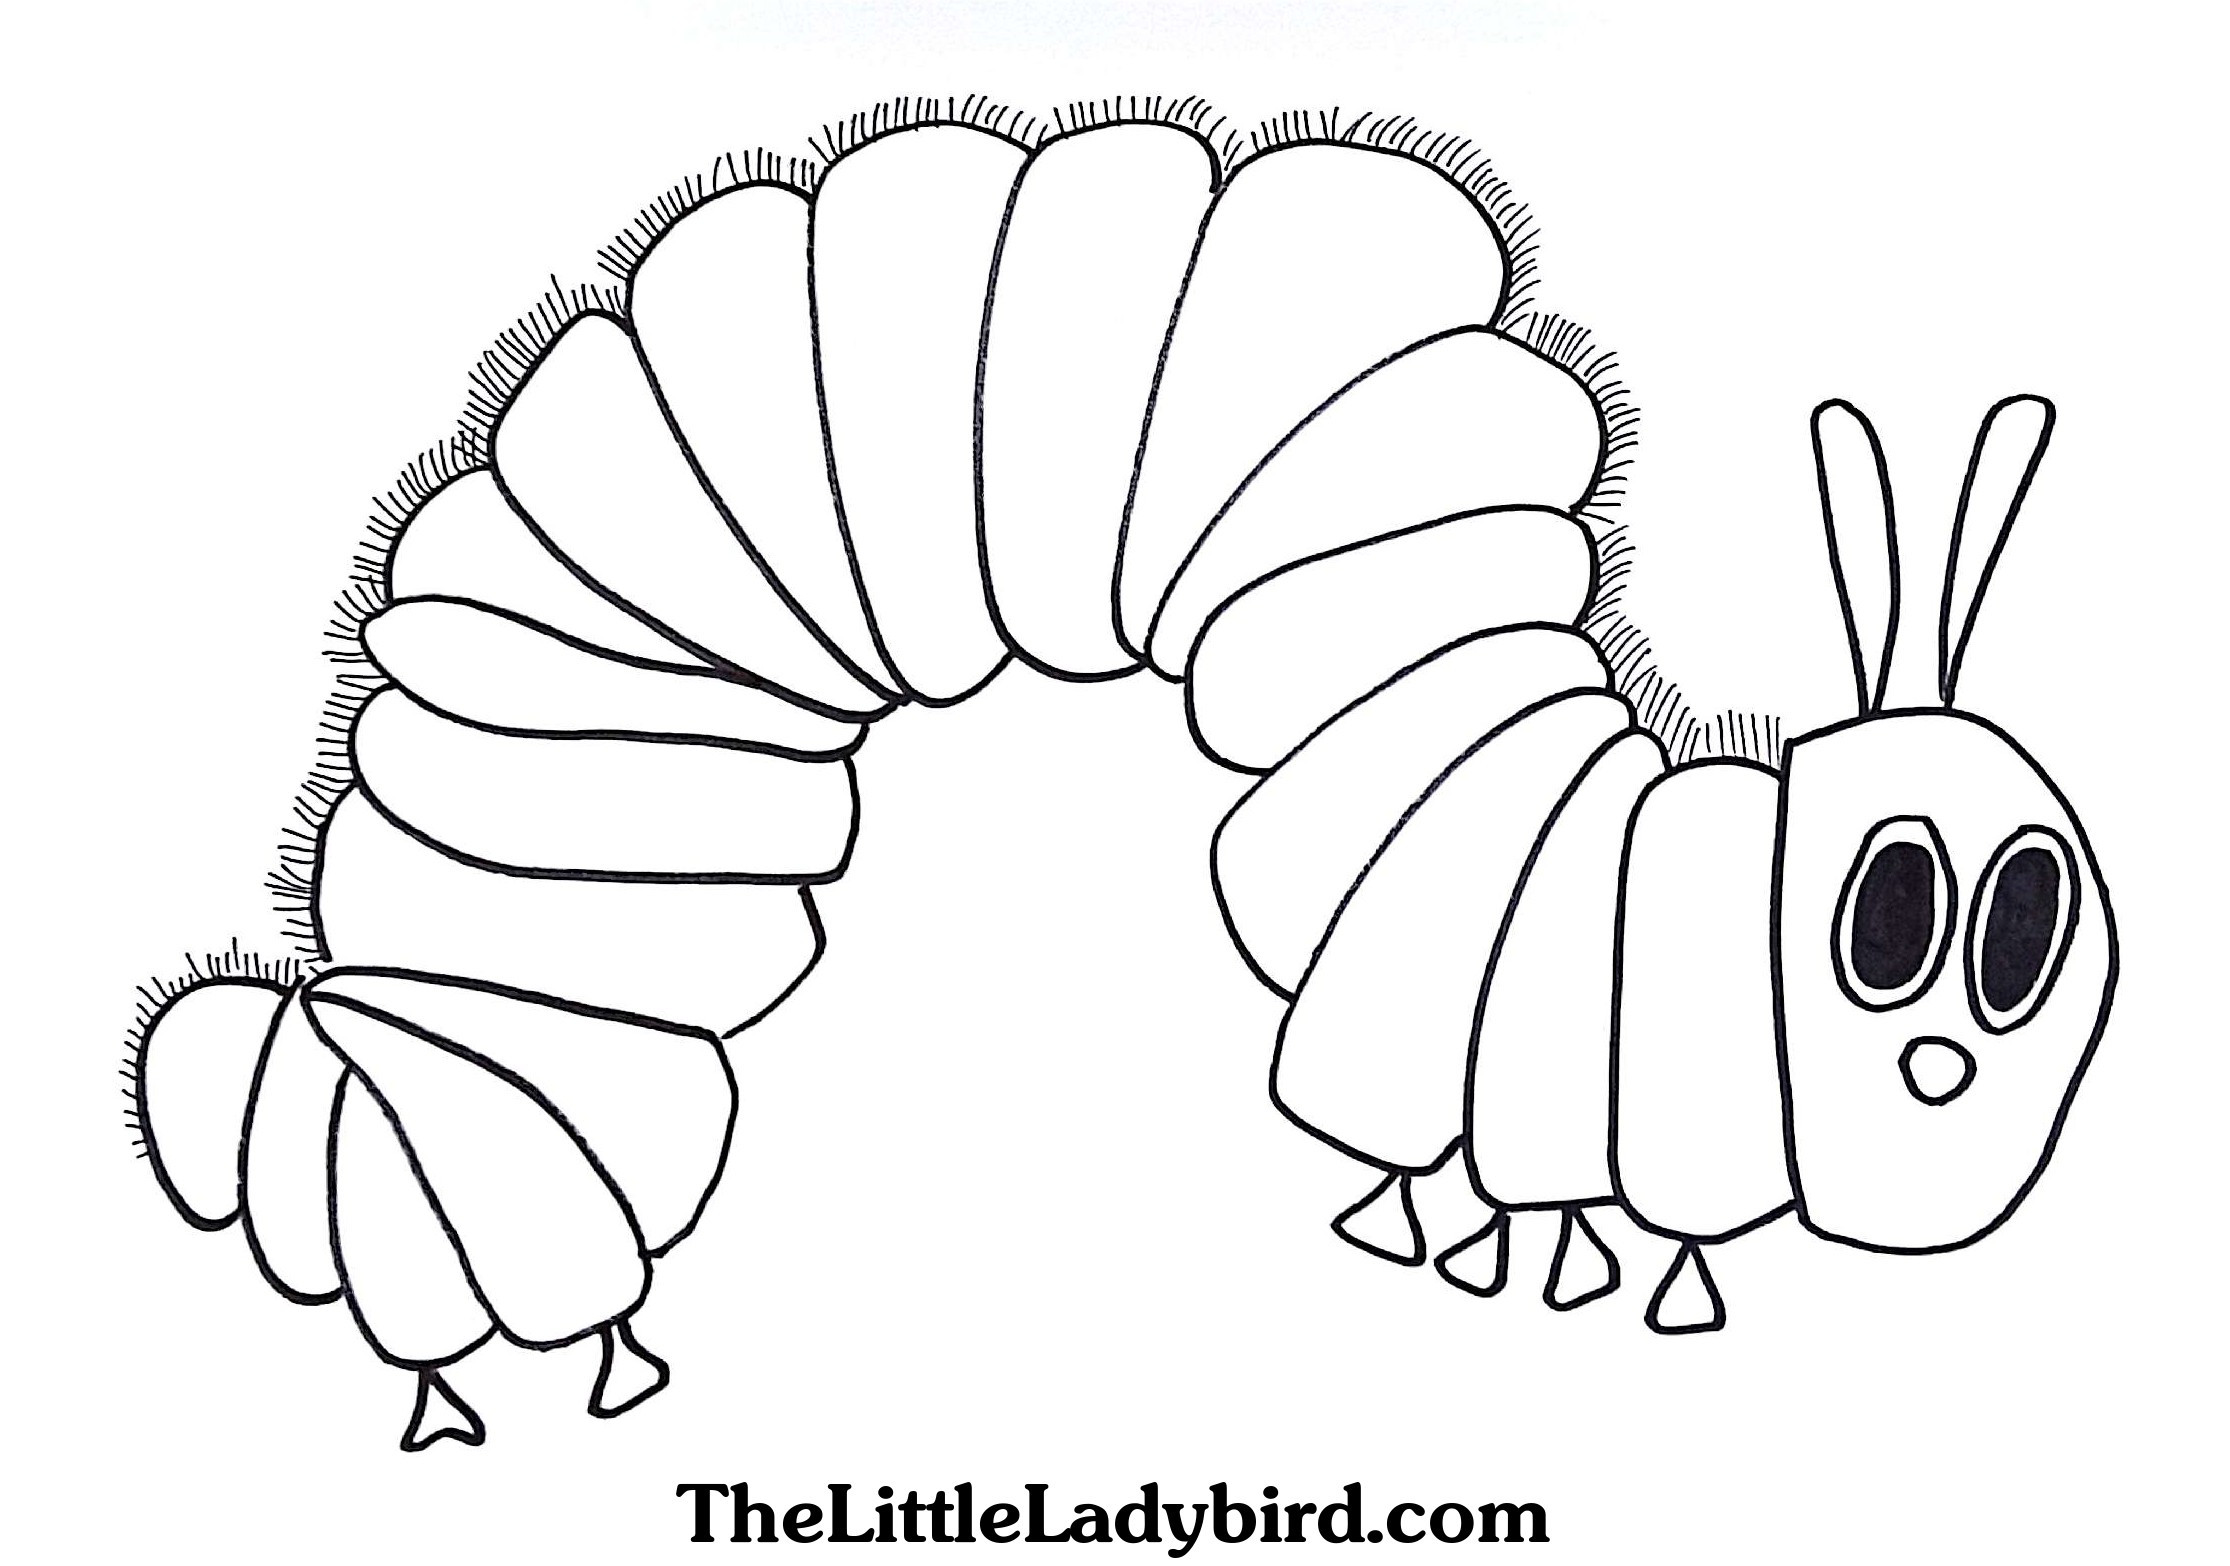 Caterpillar Coloring Pages
 Very Hungry Caterpillar Coloring Pages Printables free